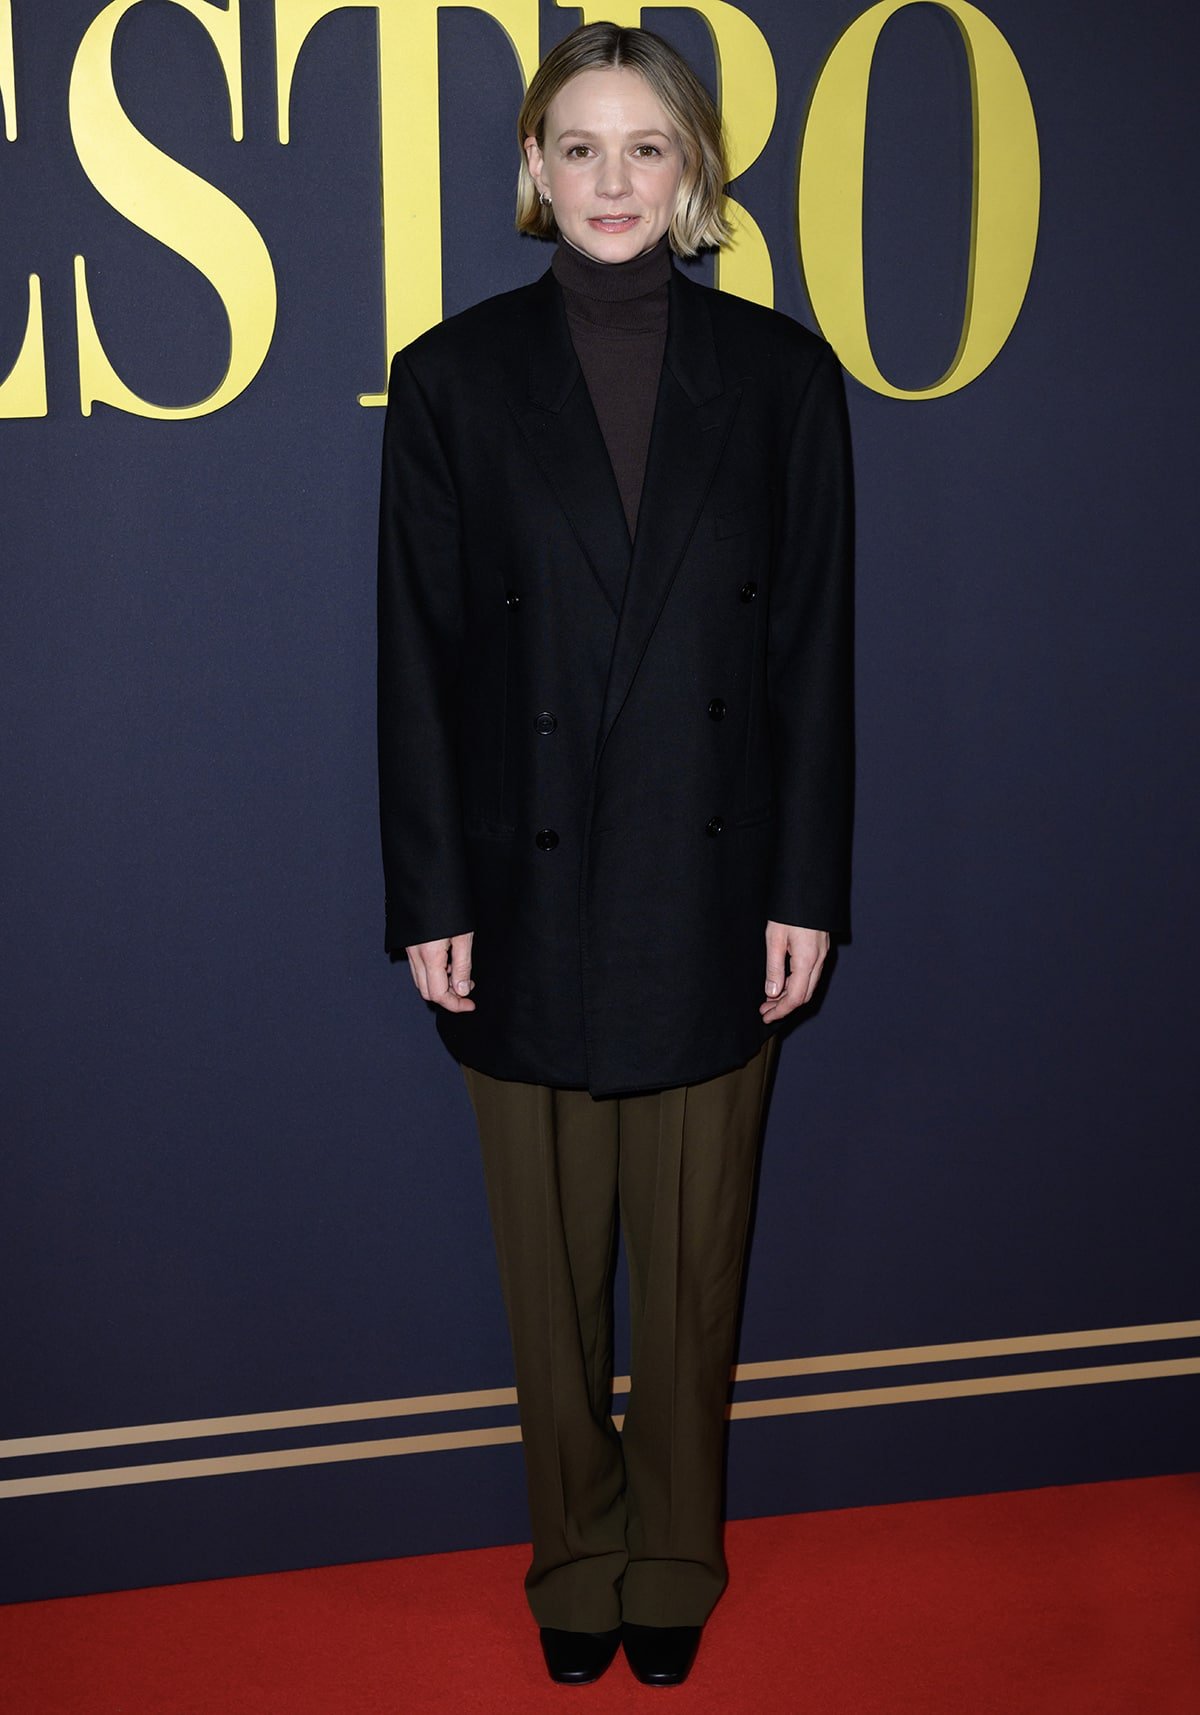 Carey Mulligan fails to impress in a brown turtleneck top, matching loose-fitting pants, and an oversized black blazer